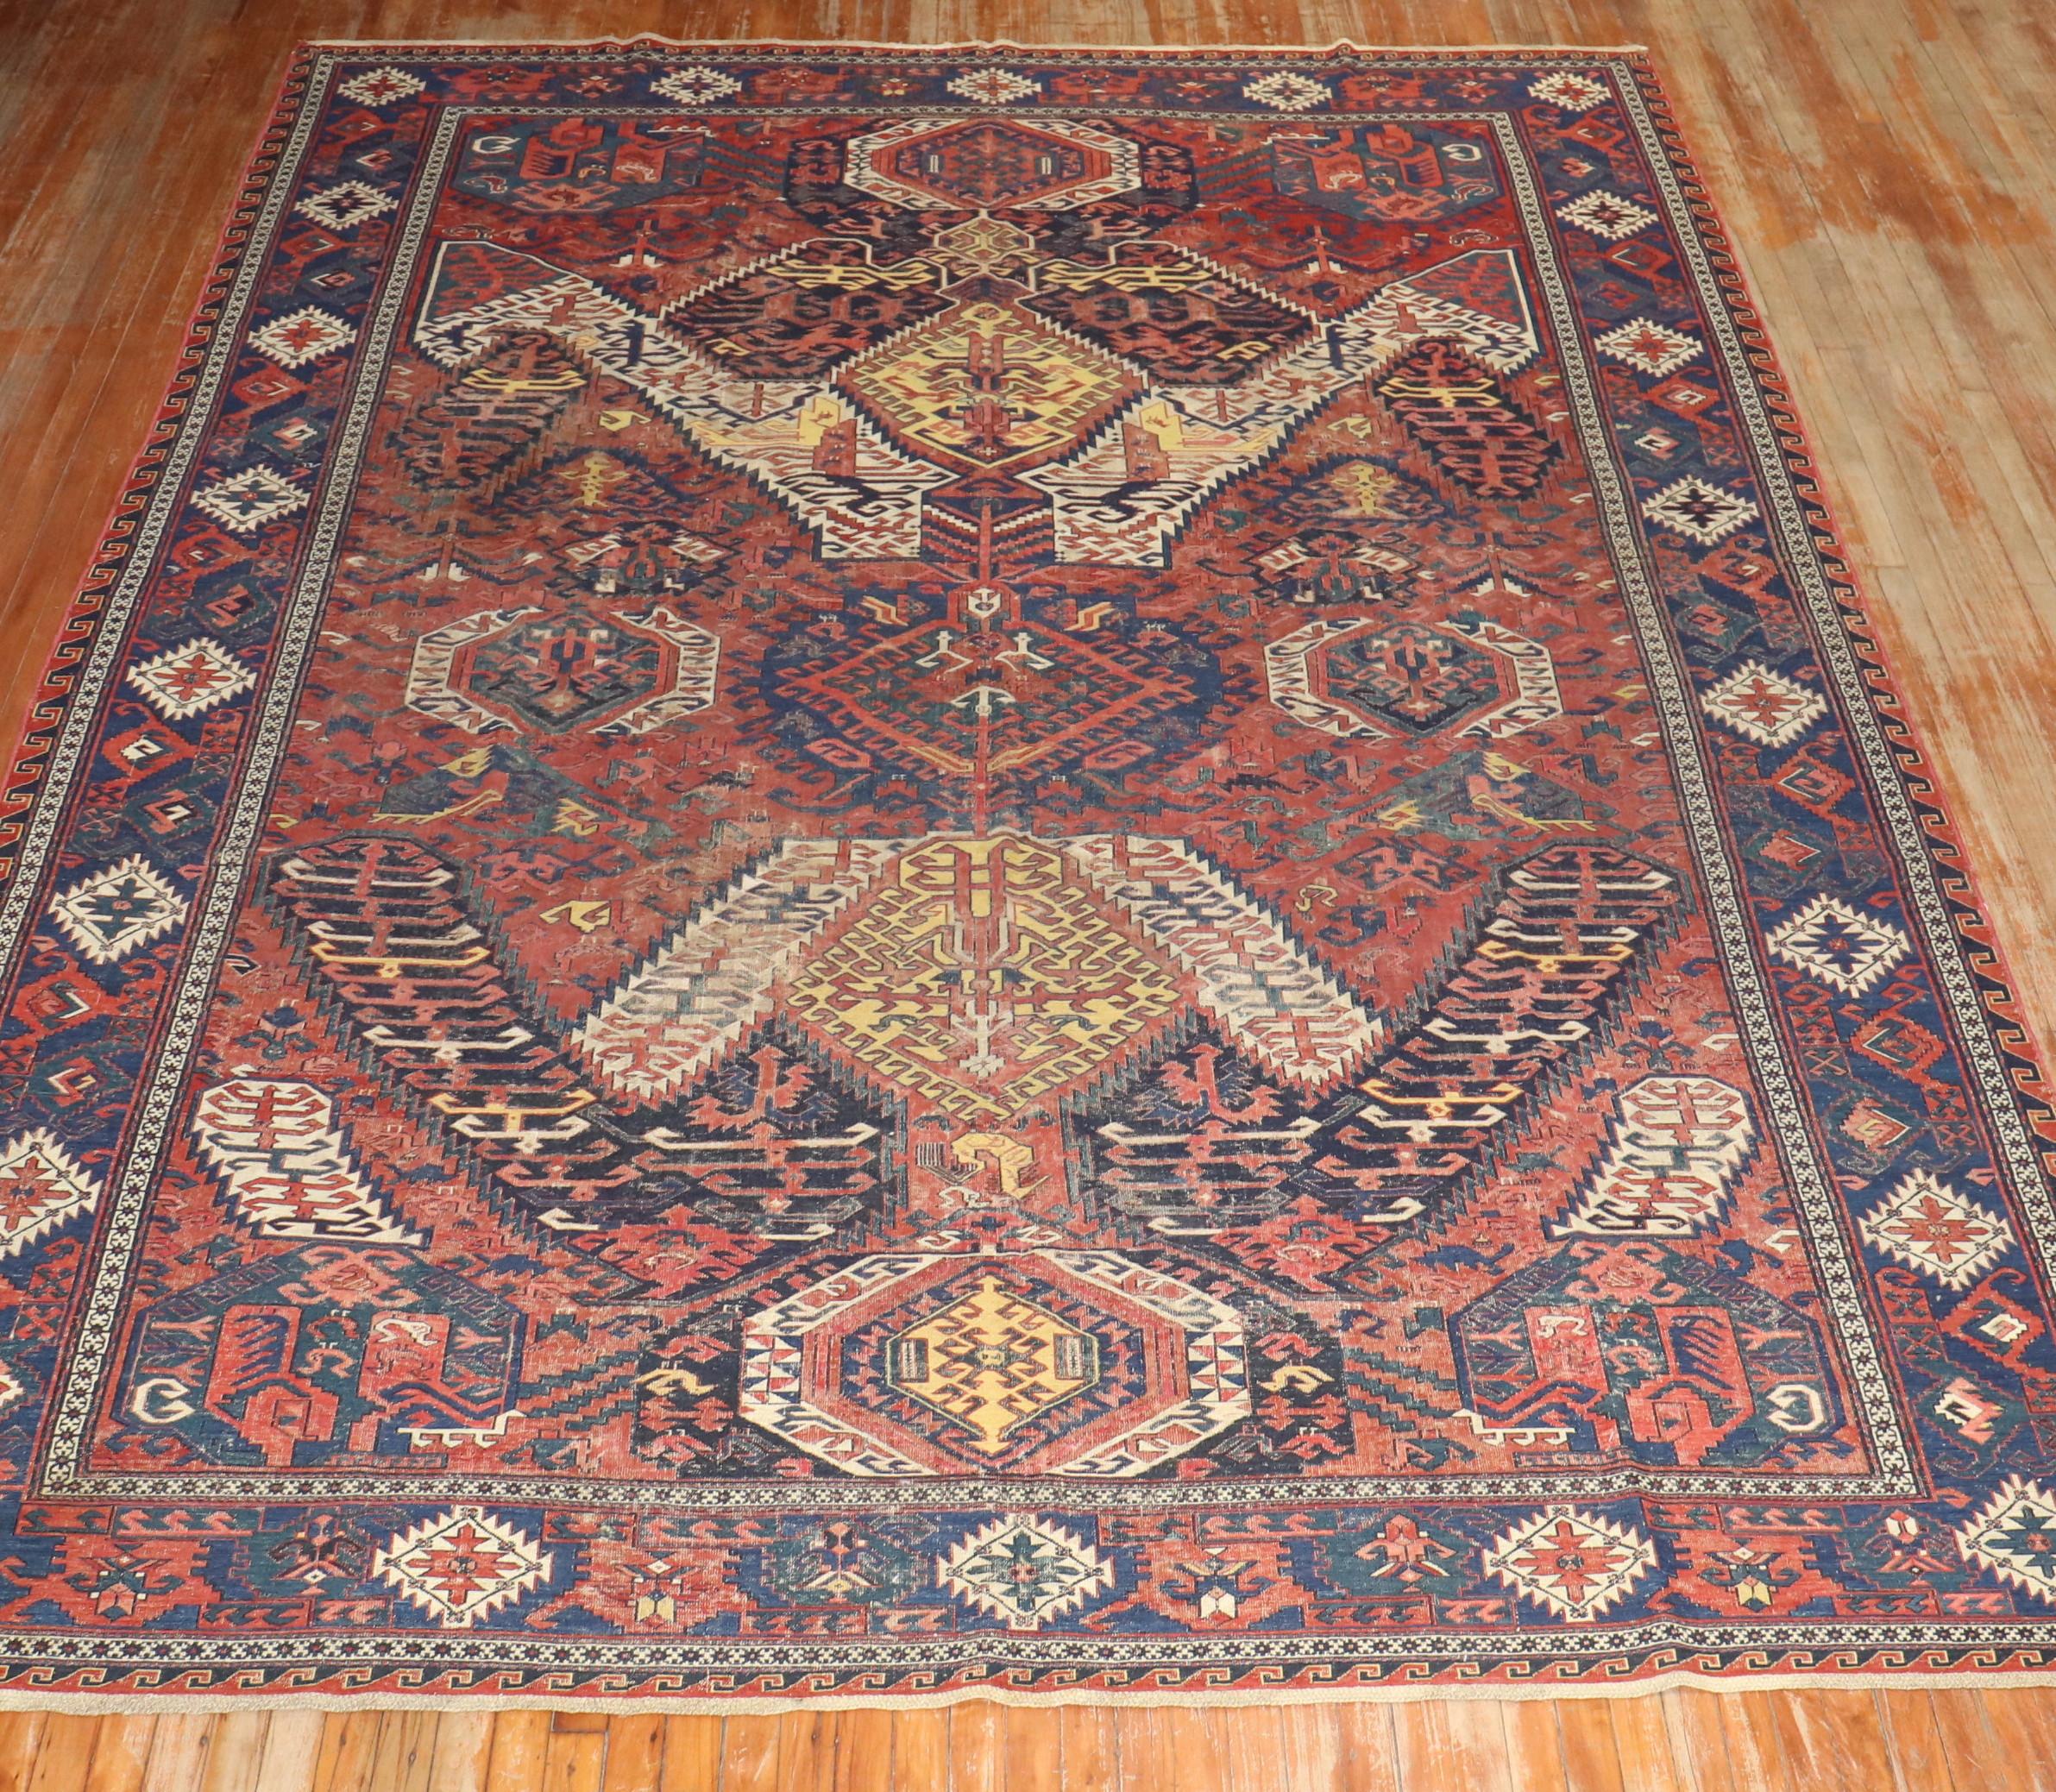 late 19th-century room size magnificent large antique Caucasian Soumak rug features a rare Dragon medallion pattern. The rust ground with contrasting green, blue, and yellow tones make this striking piece an exceptionally rare and appealing example